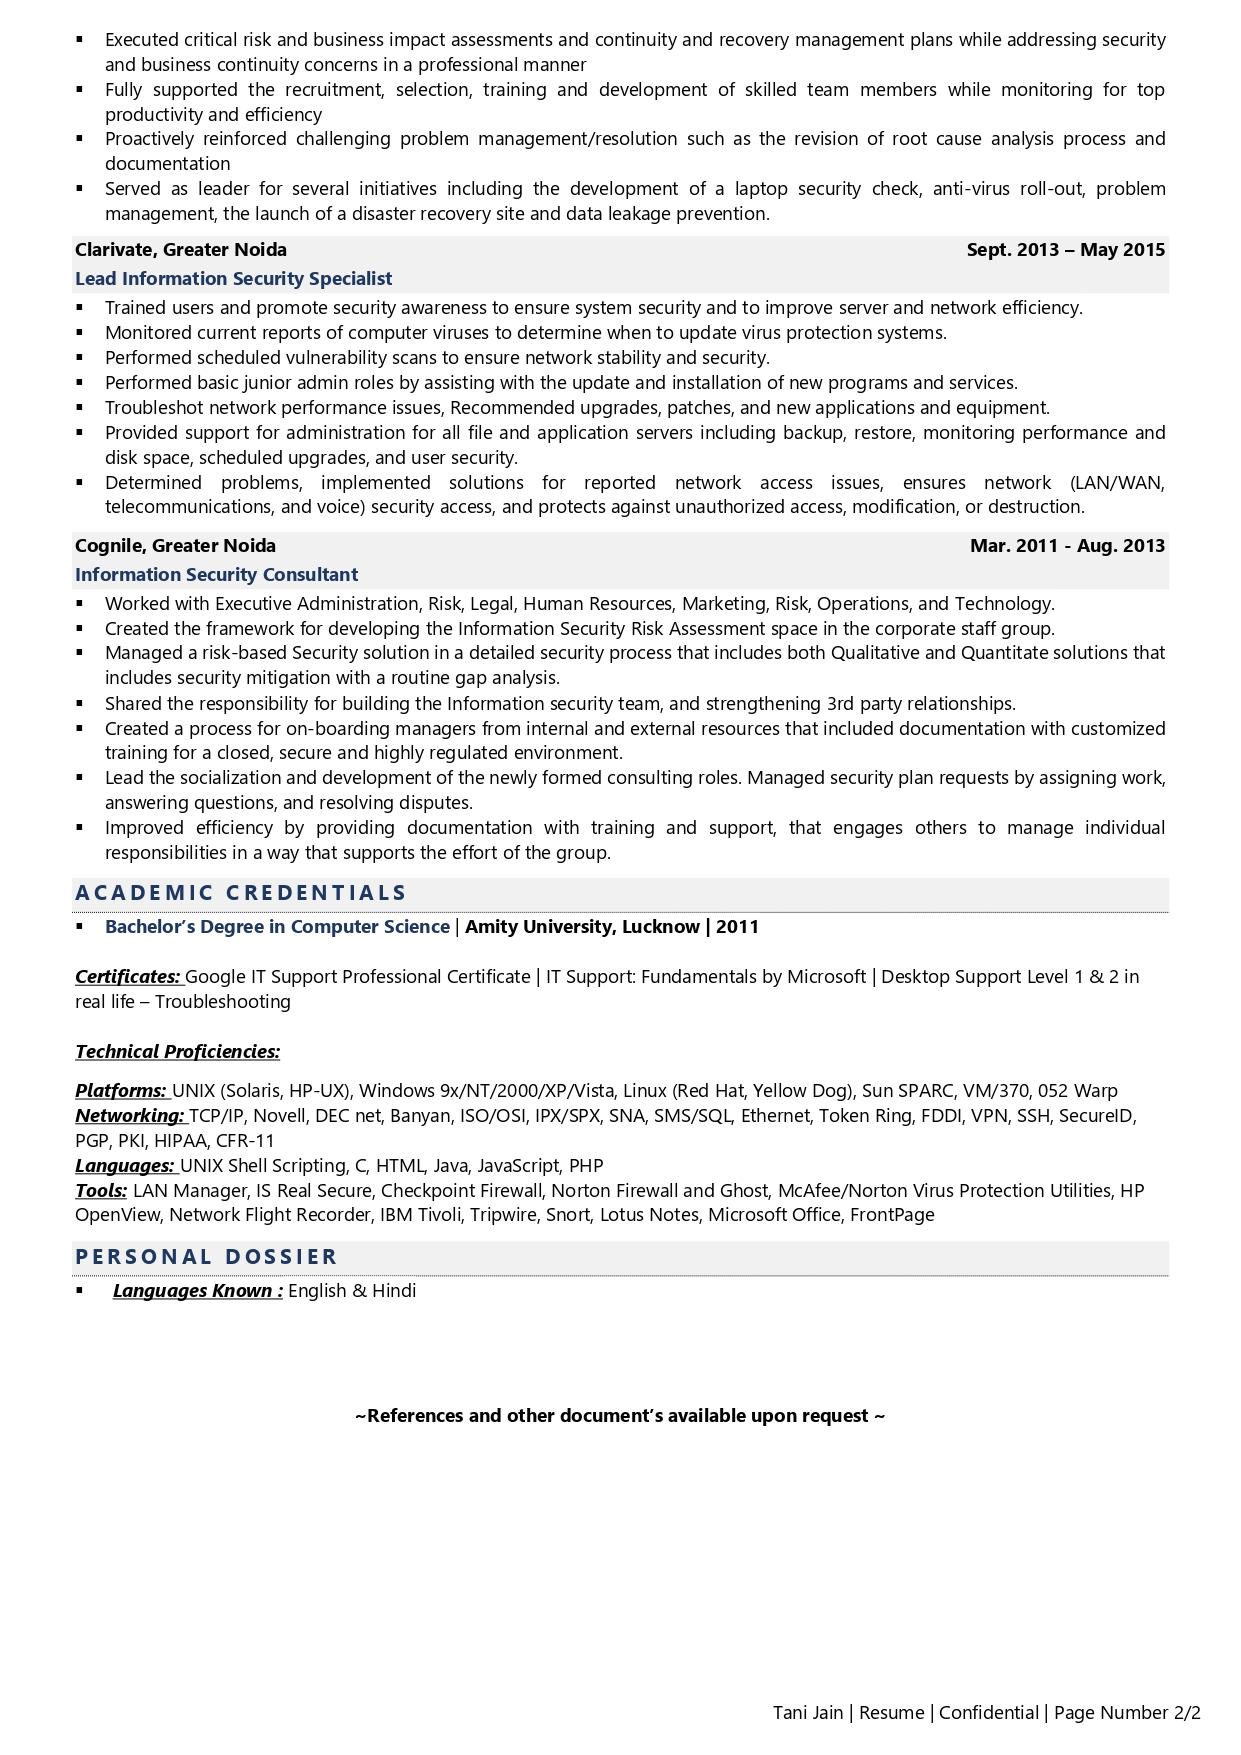 Information Security Specialist - Resume Example & Template